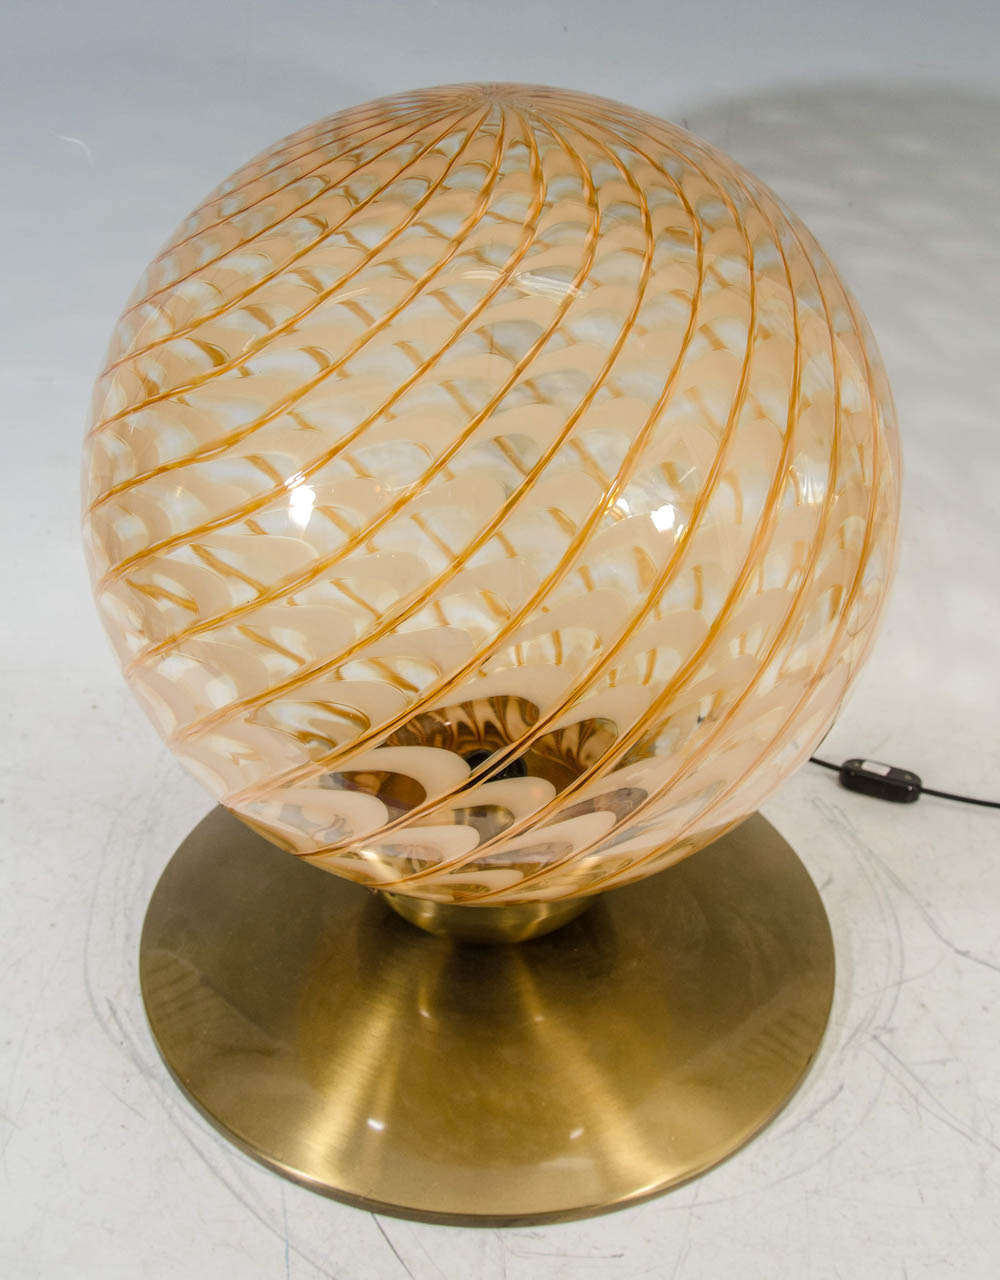 A vintage circa 1950s Italian blown glass globe table lamp or pendant with new brass fitting. Glass globe is brass and copper colored with a curved stripe pattern. Canopy is newly rewired.

In good vintage condition with age appropriate wear.